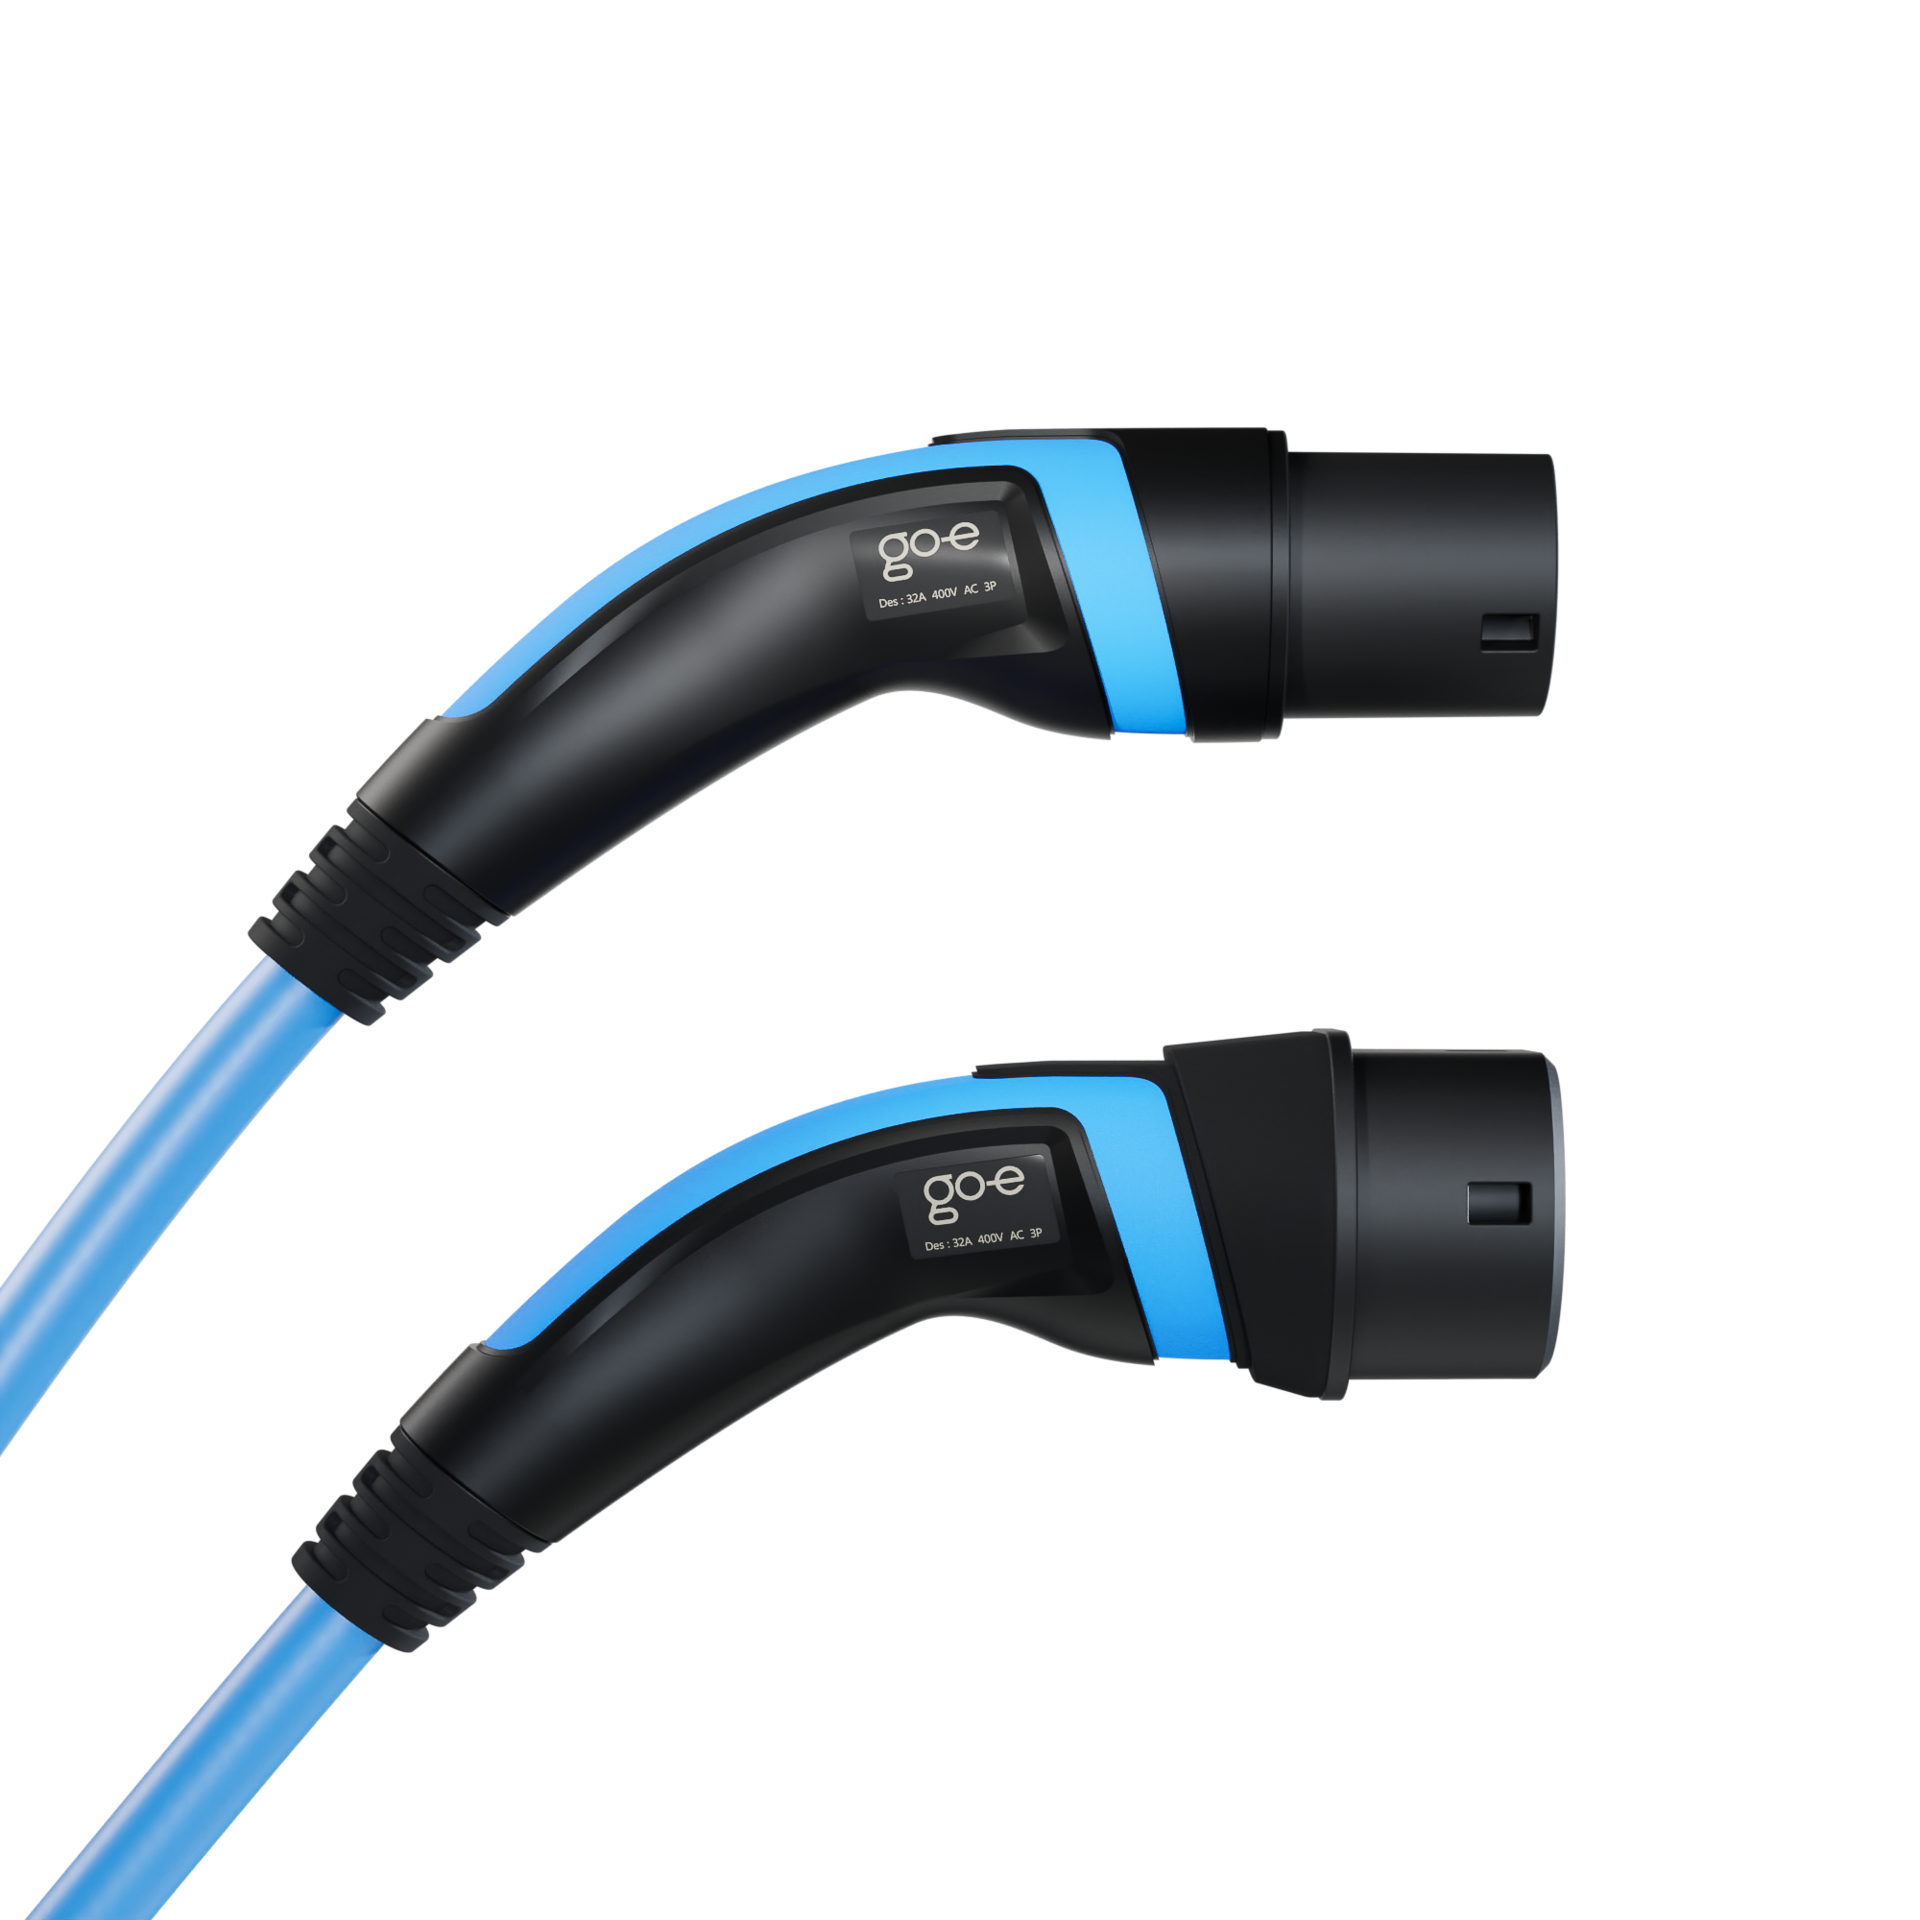 Type 2 charging cable up to 22 kW